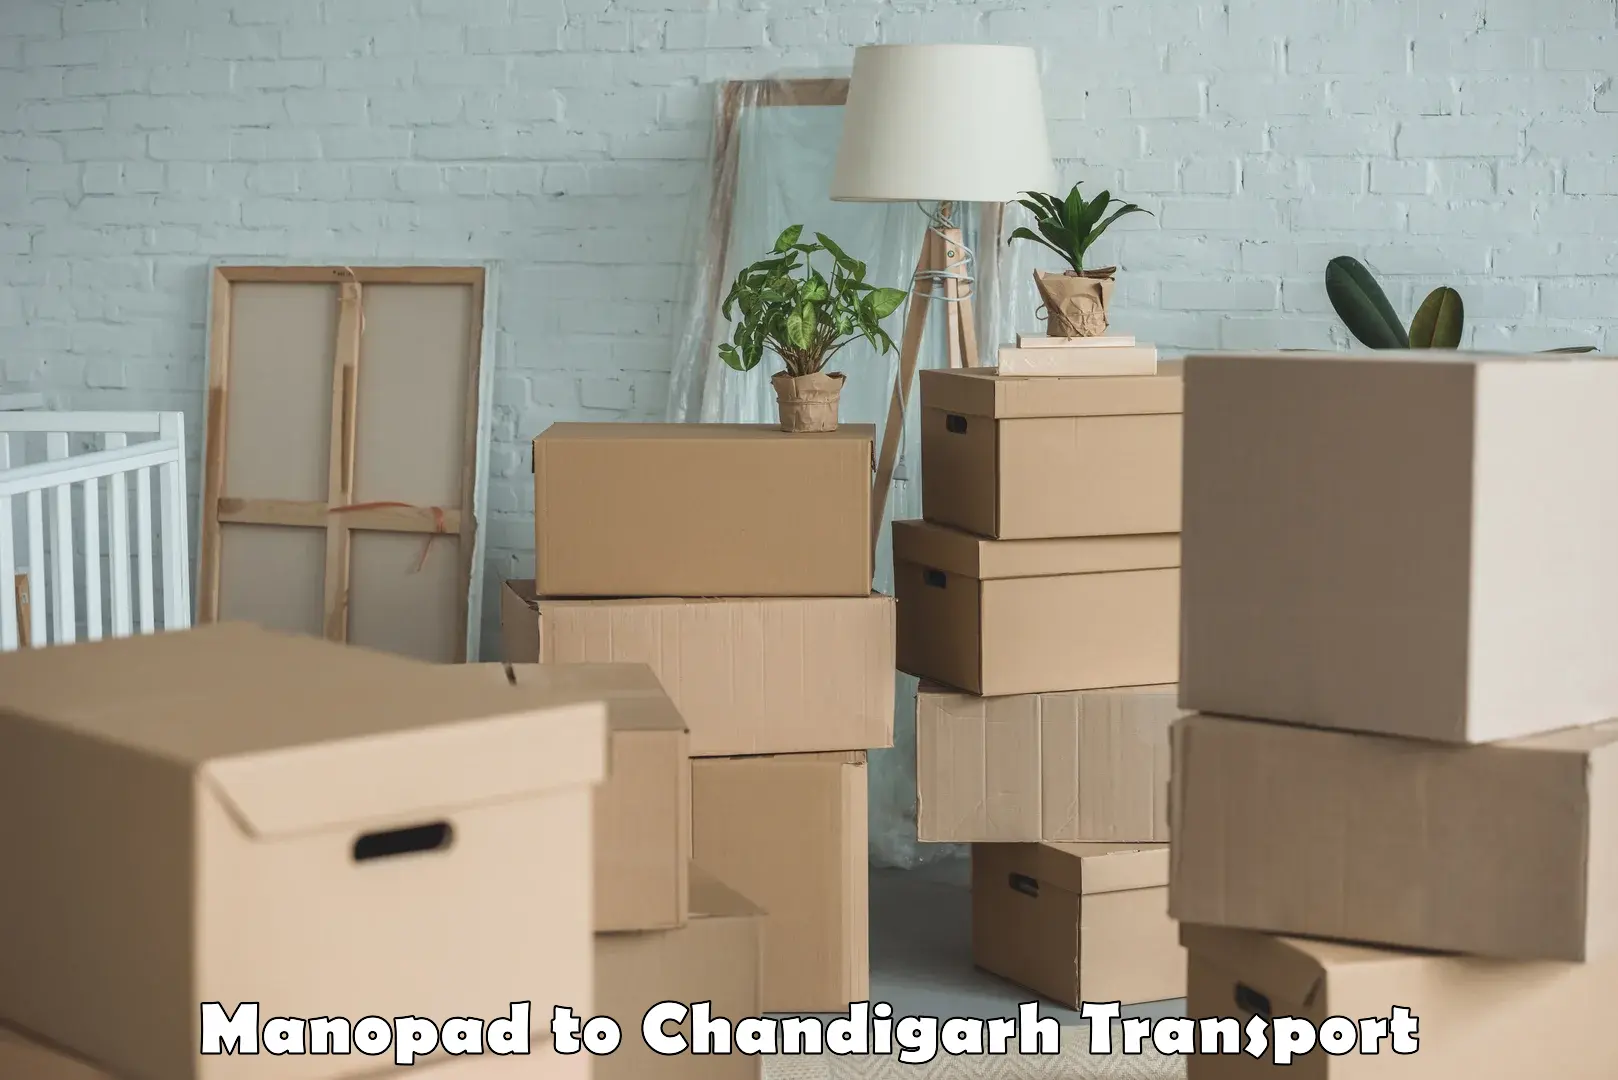 Goods delivery service Manopad to Chandigarh